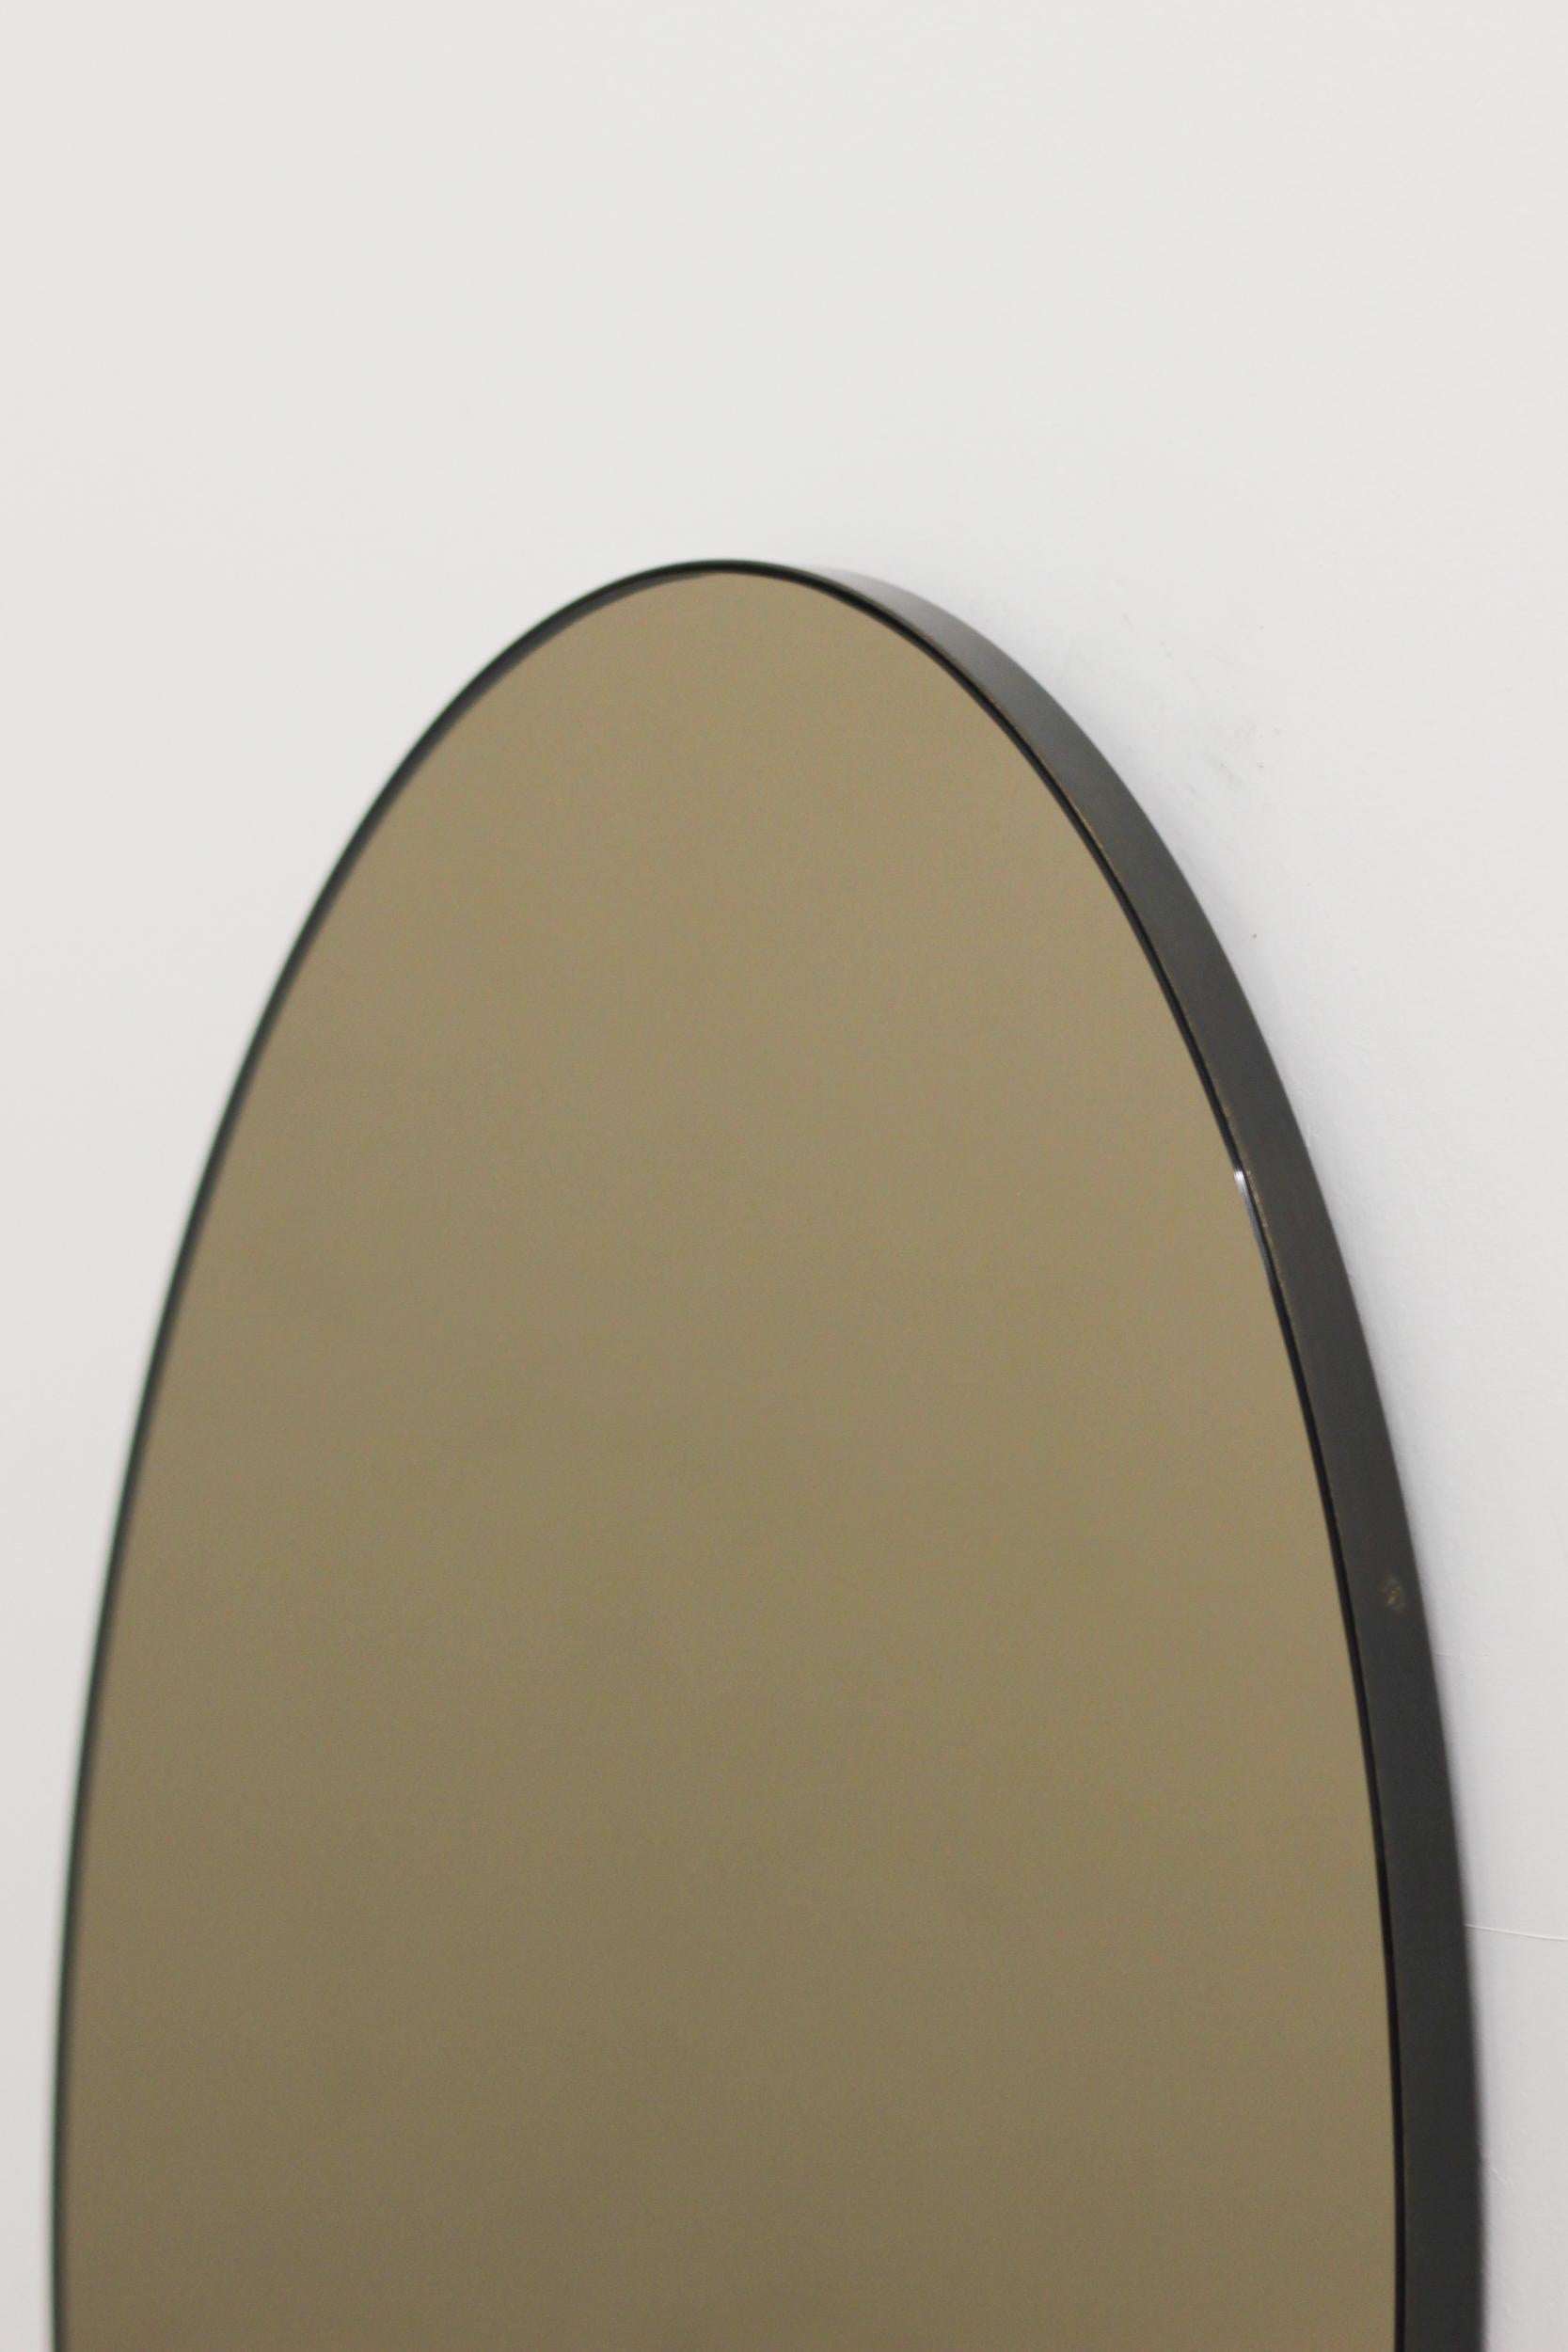 Organic Modern Ovalis Oval Bronze Tinted Contemporary Mirror with Patina Frame, XL For Sale